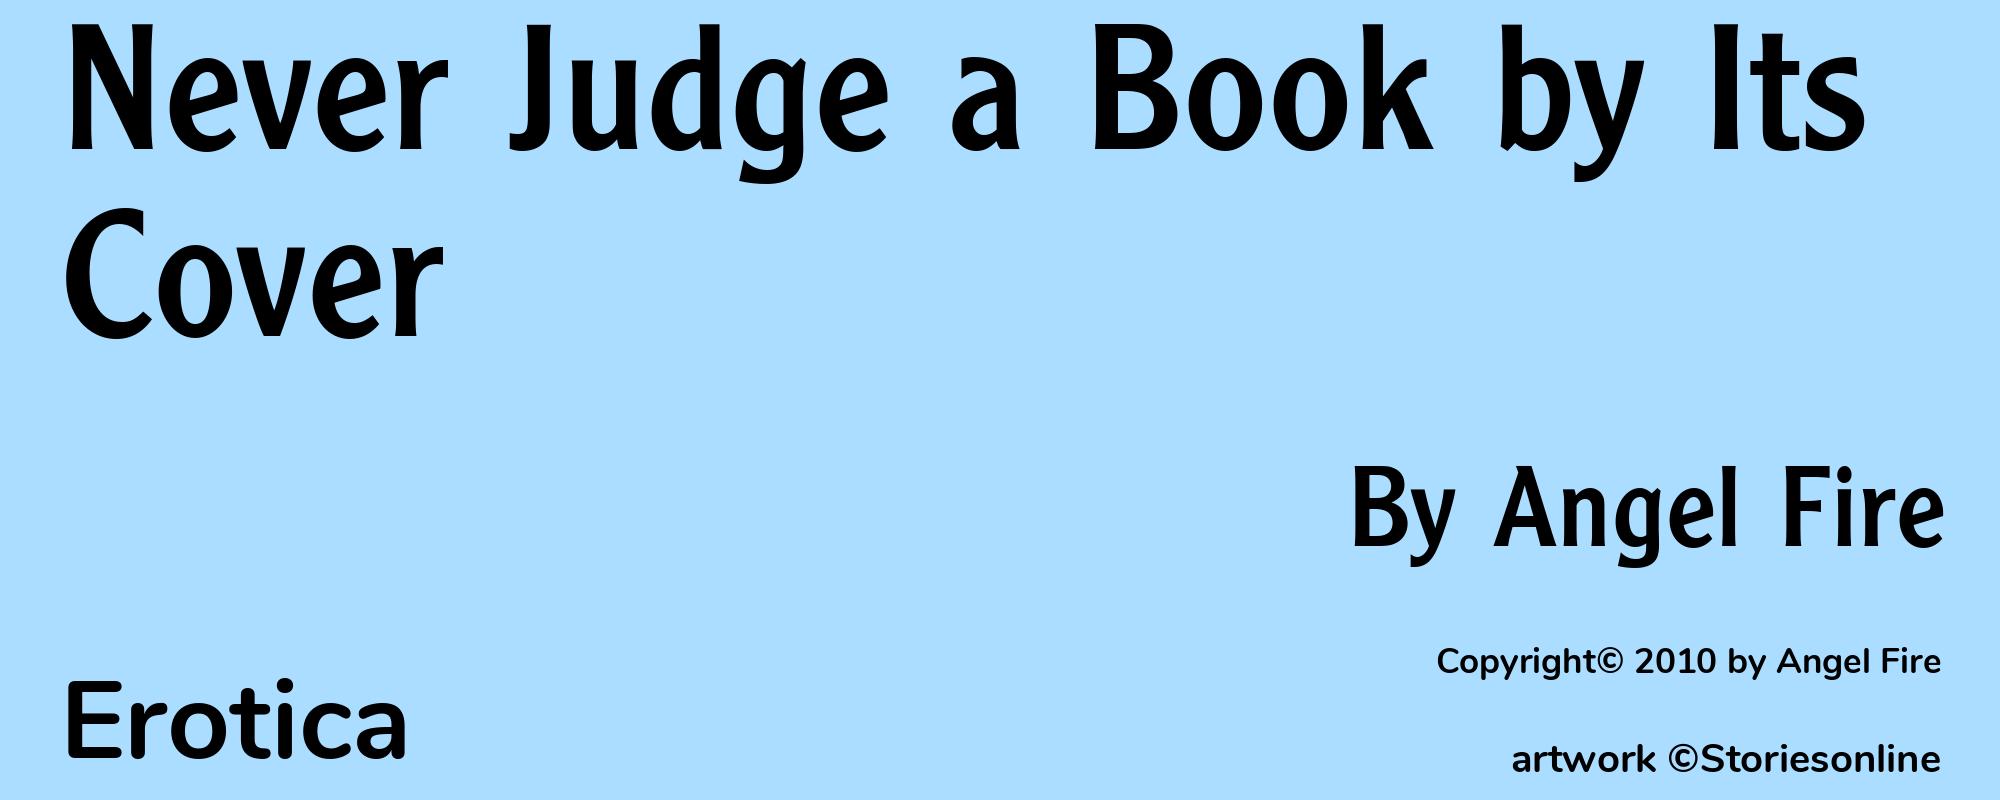 Never Judge a Book by Its Cover - Cover